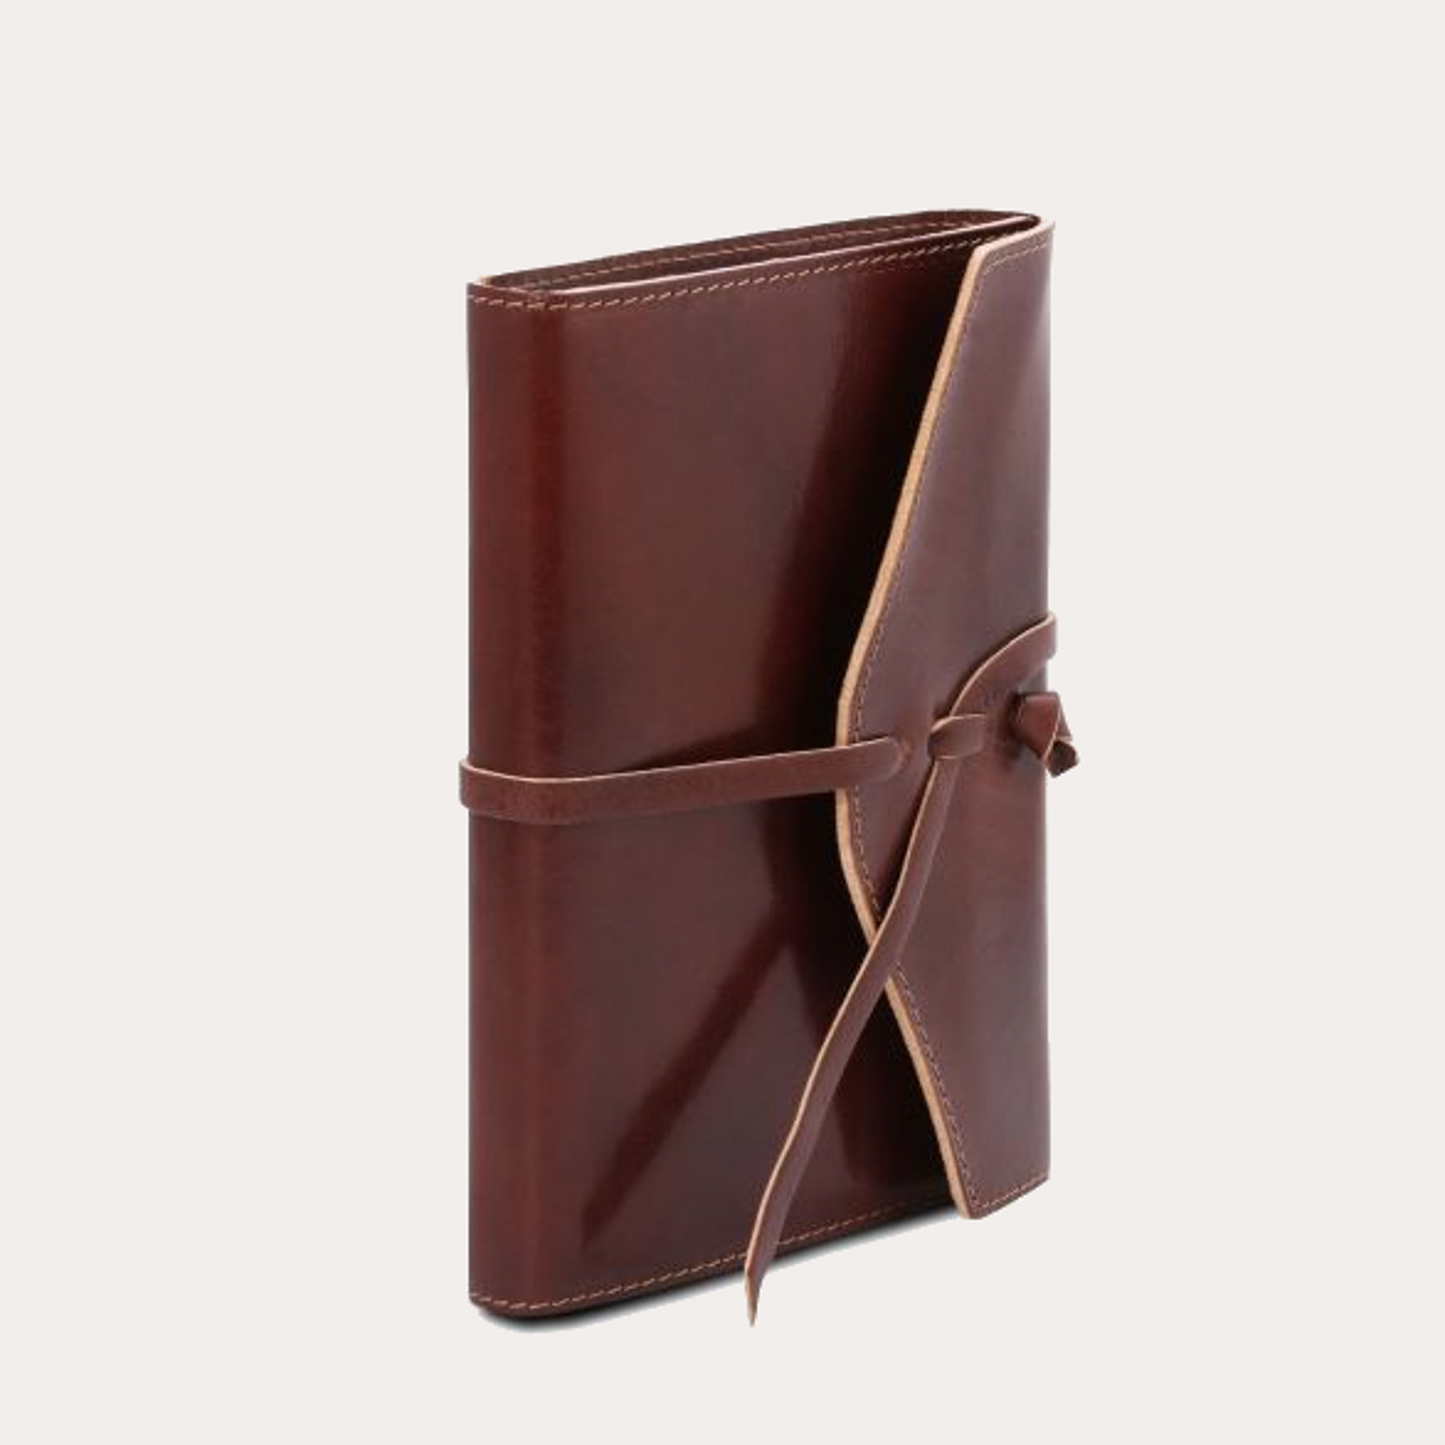 Tuscany Leather Brown Leather Journal / Notebook